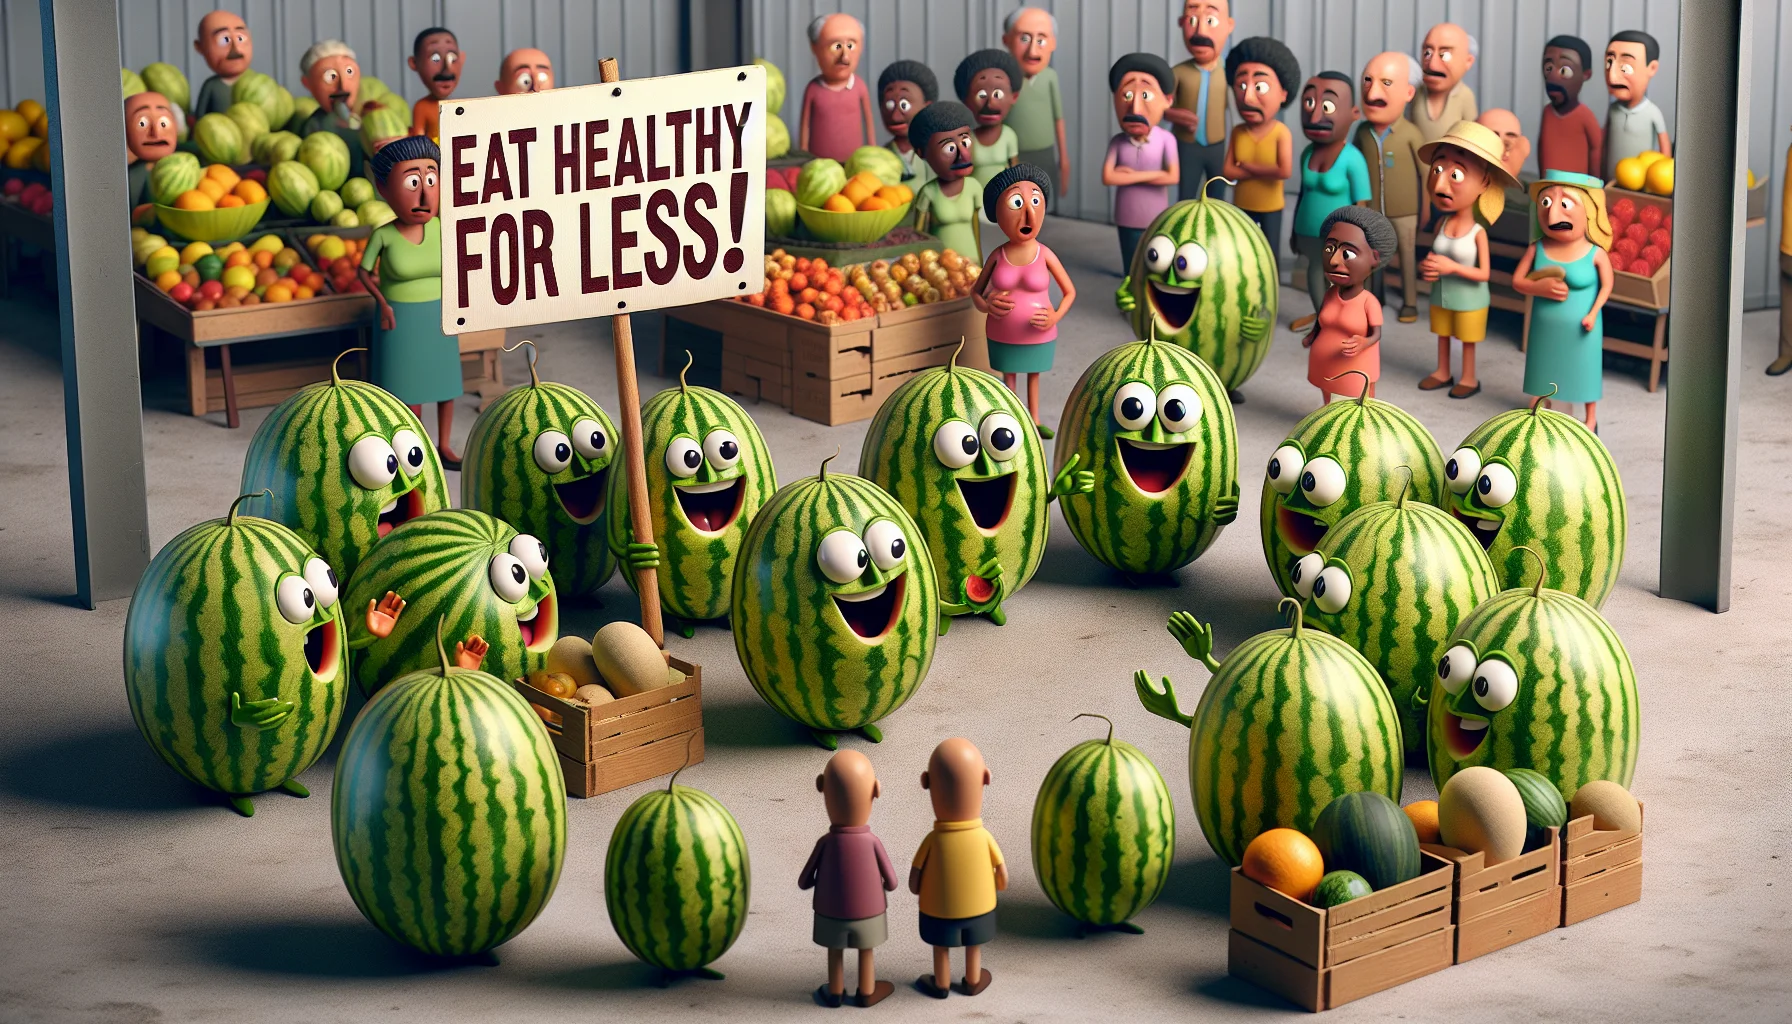 A humorous scene depicting a group of melons engaging in a lively conversation at a fruit and vegetable market. The melons have expressive faces and are eagerly chatting about the benefits of eating healthy while being budget-friendly. One melon has a placard with the words 'Eat healthy for less!' Balanced composition with clear focus on the melon personalities. Include a diverse crowd of customers with various descents and genders, each reacting to the melon conversation in their unique way, from amused to intrigued, reflecting the charm and magnetism of the entertaining and educational fruit talk.